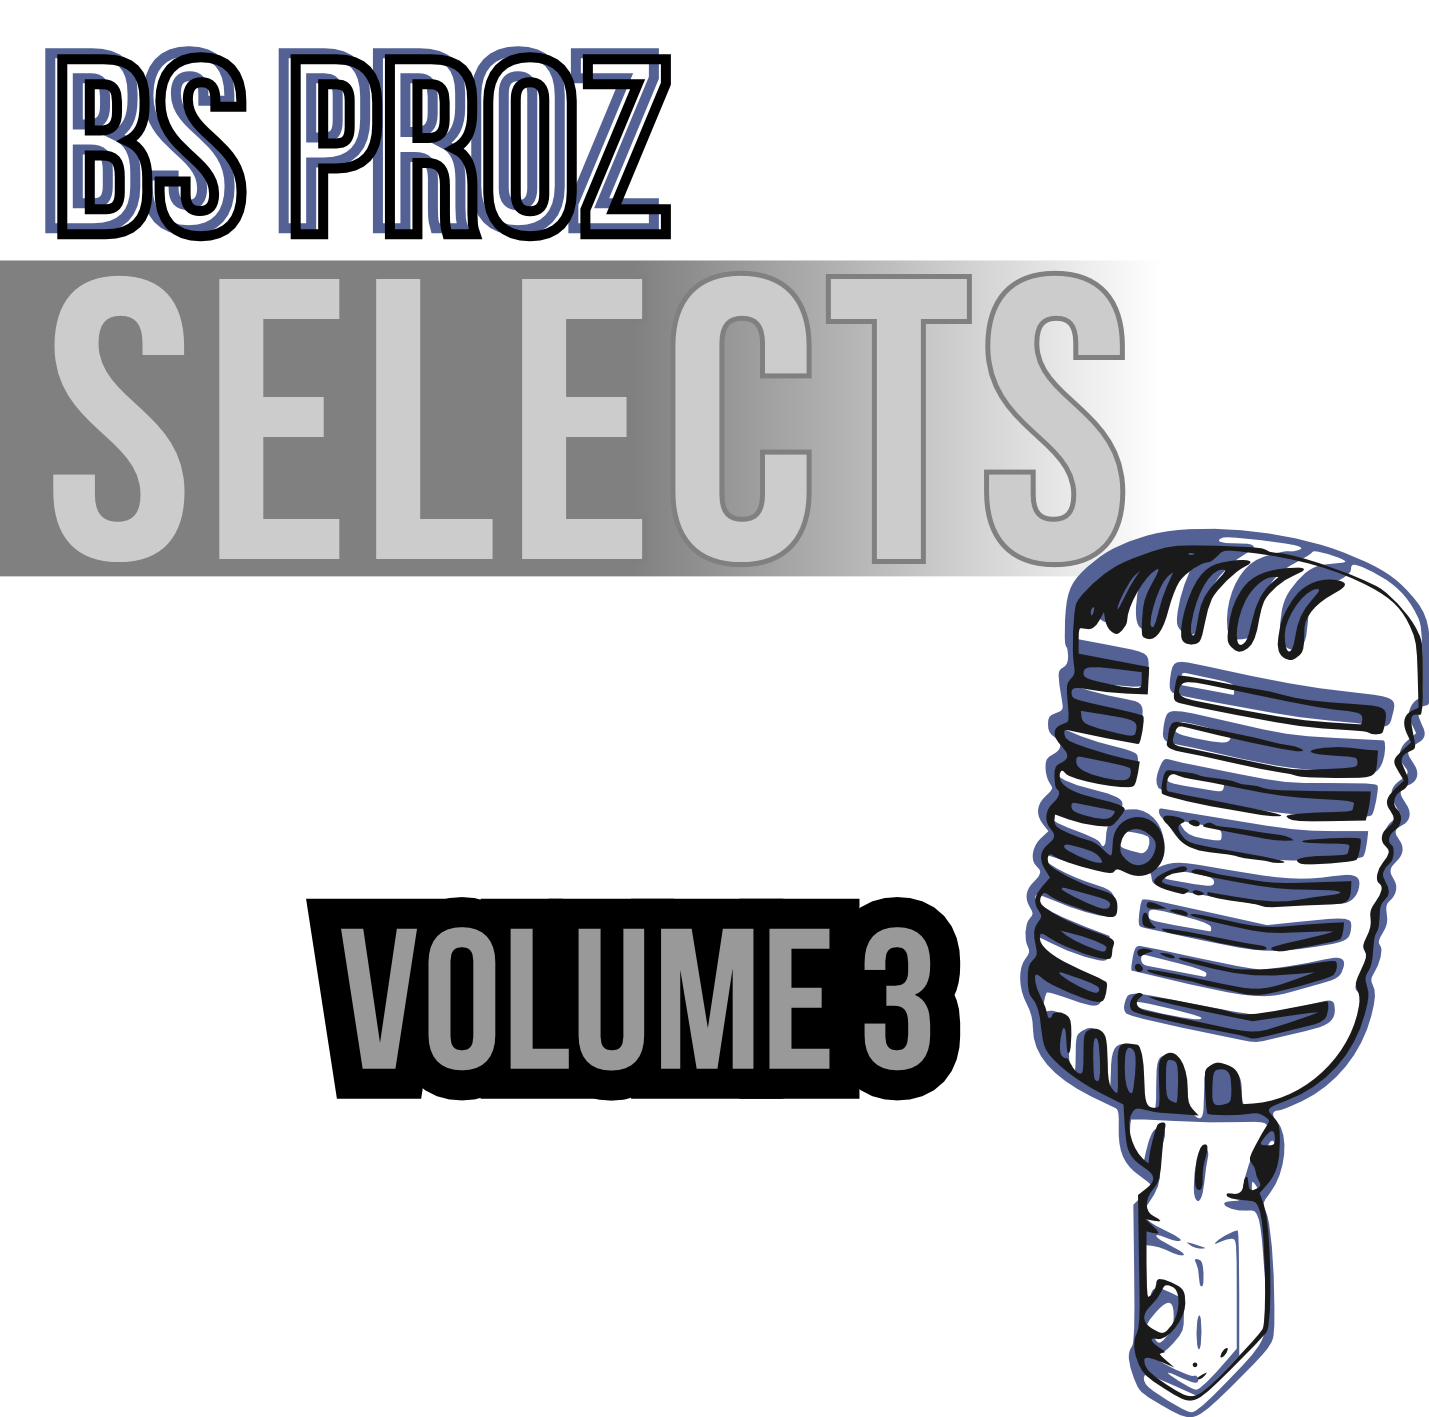 BS Proz Selects Volume 3